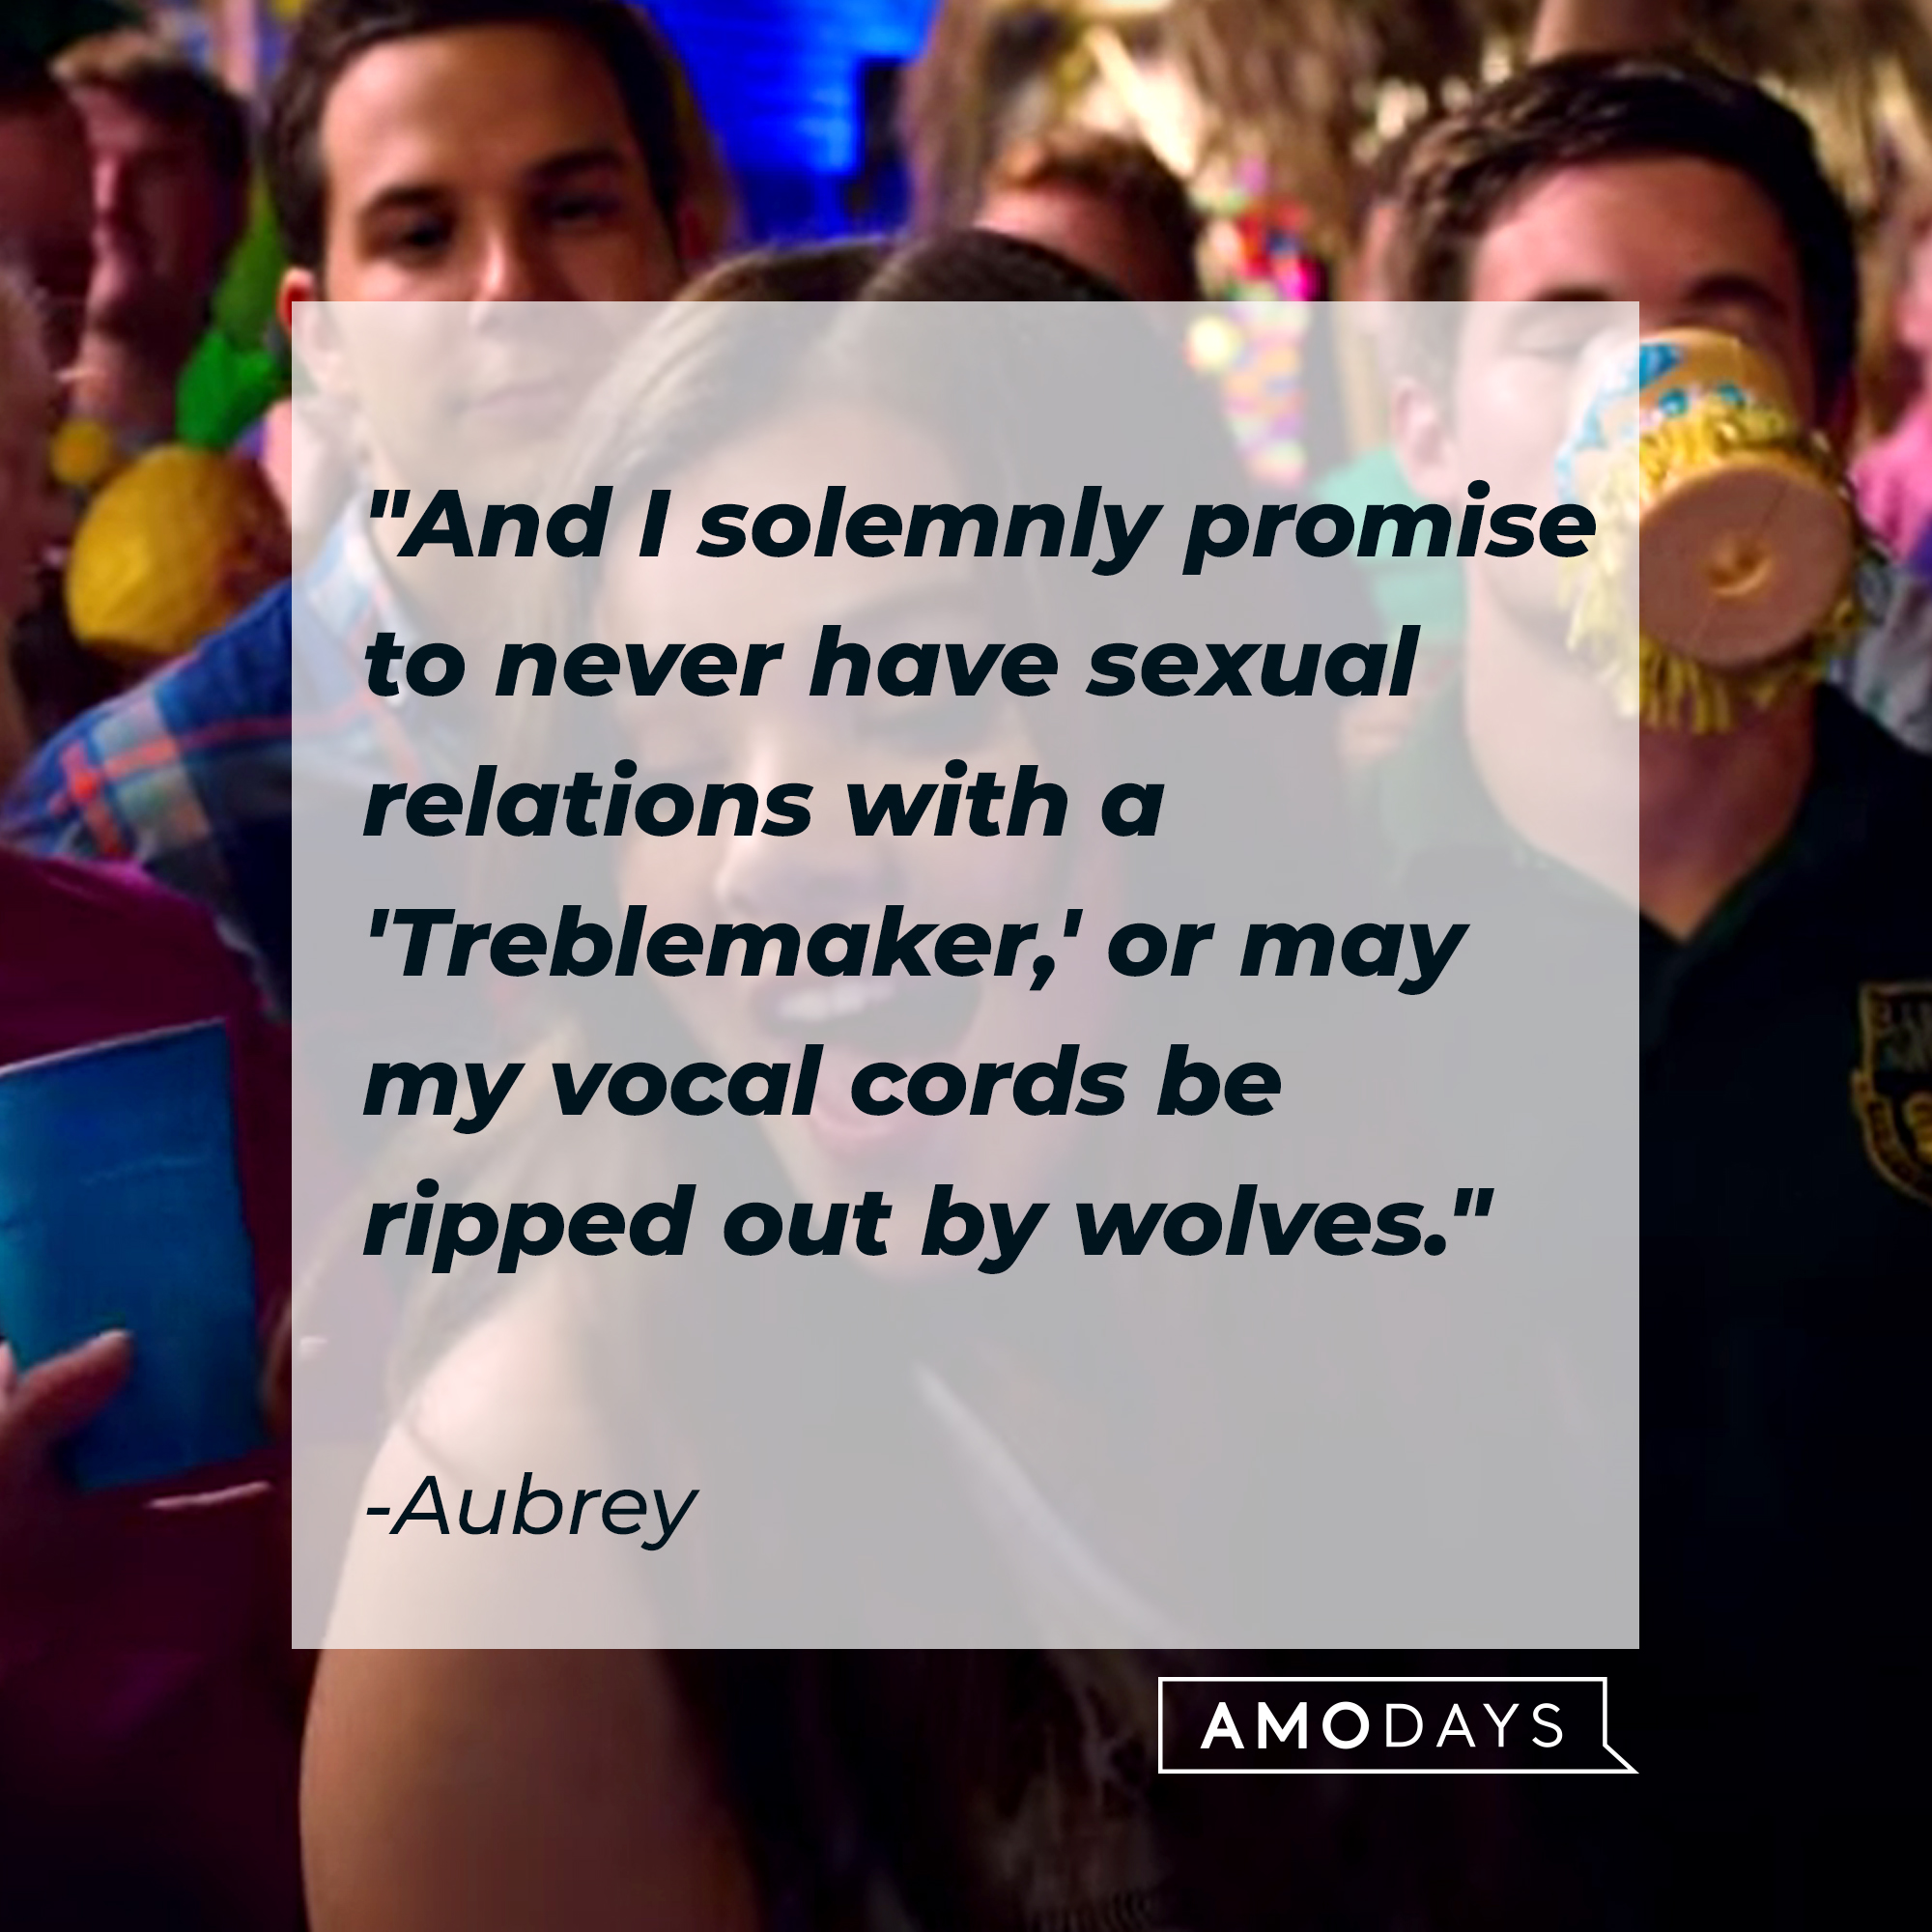 The Aubrey quote, "And I solemnly promise to never have sexual relations with a 'Treblemaker,' or may my vocal cords be ripped out by wolves." |  Source: youtube.com/PitchPerfect